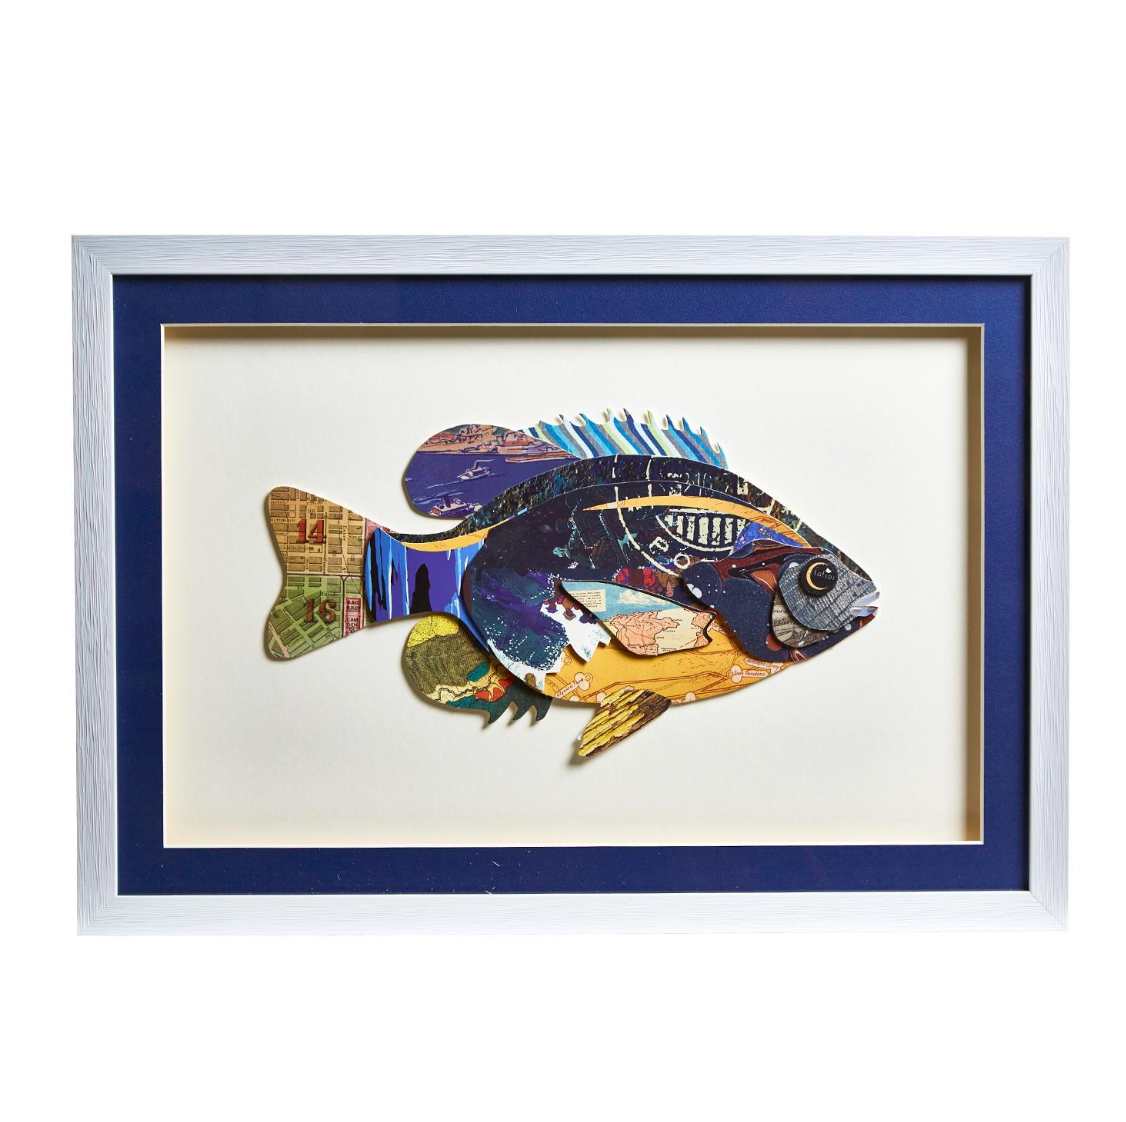 Fish Collage Wall Art 14 x 19.5